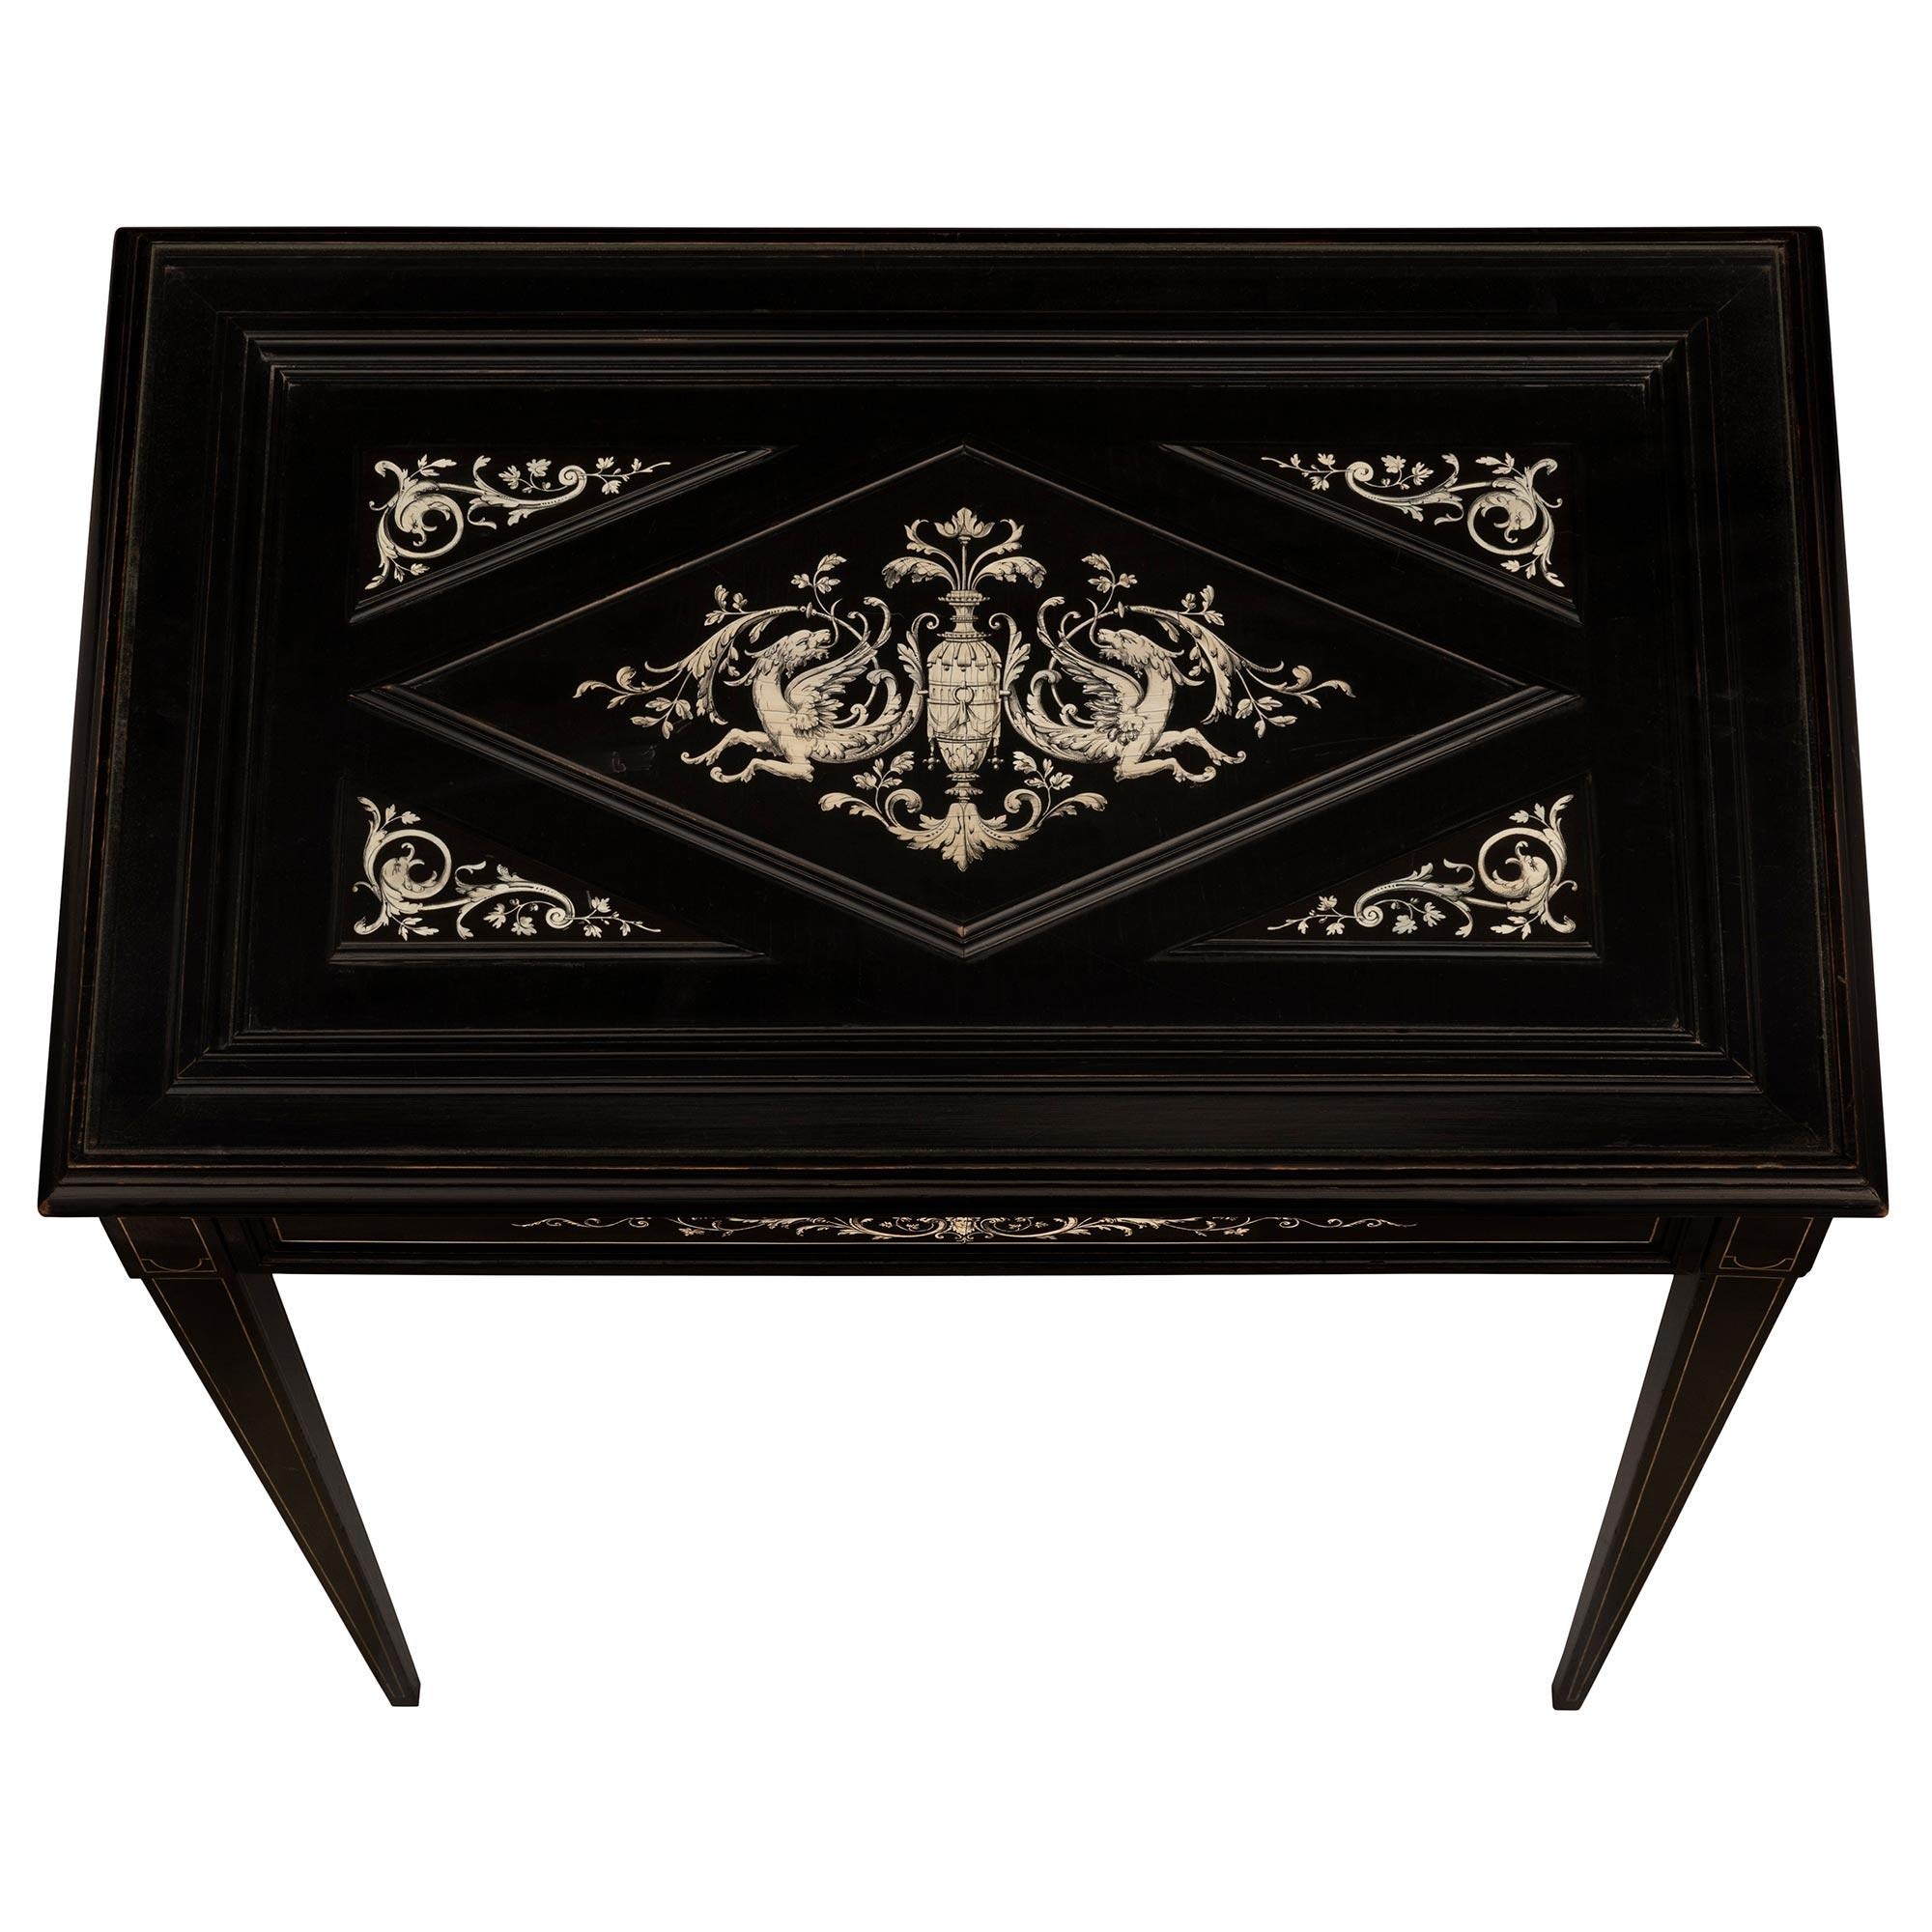 A charming and extremely elegant Italian 19th century Milanese st. ebonized Fruitwood and bone side table. The one drawer table is raised by delicate square tapered legs with fine inlaid bone fillets below rectangular bone inlaid block reserves. The